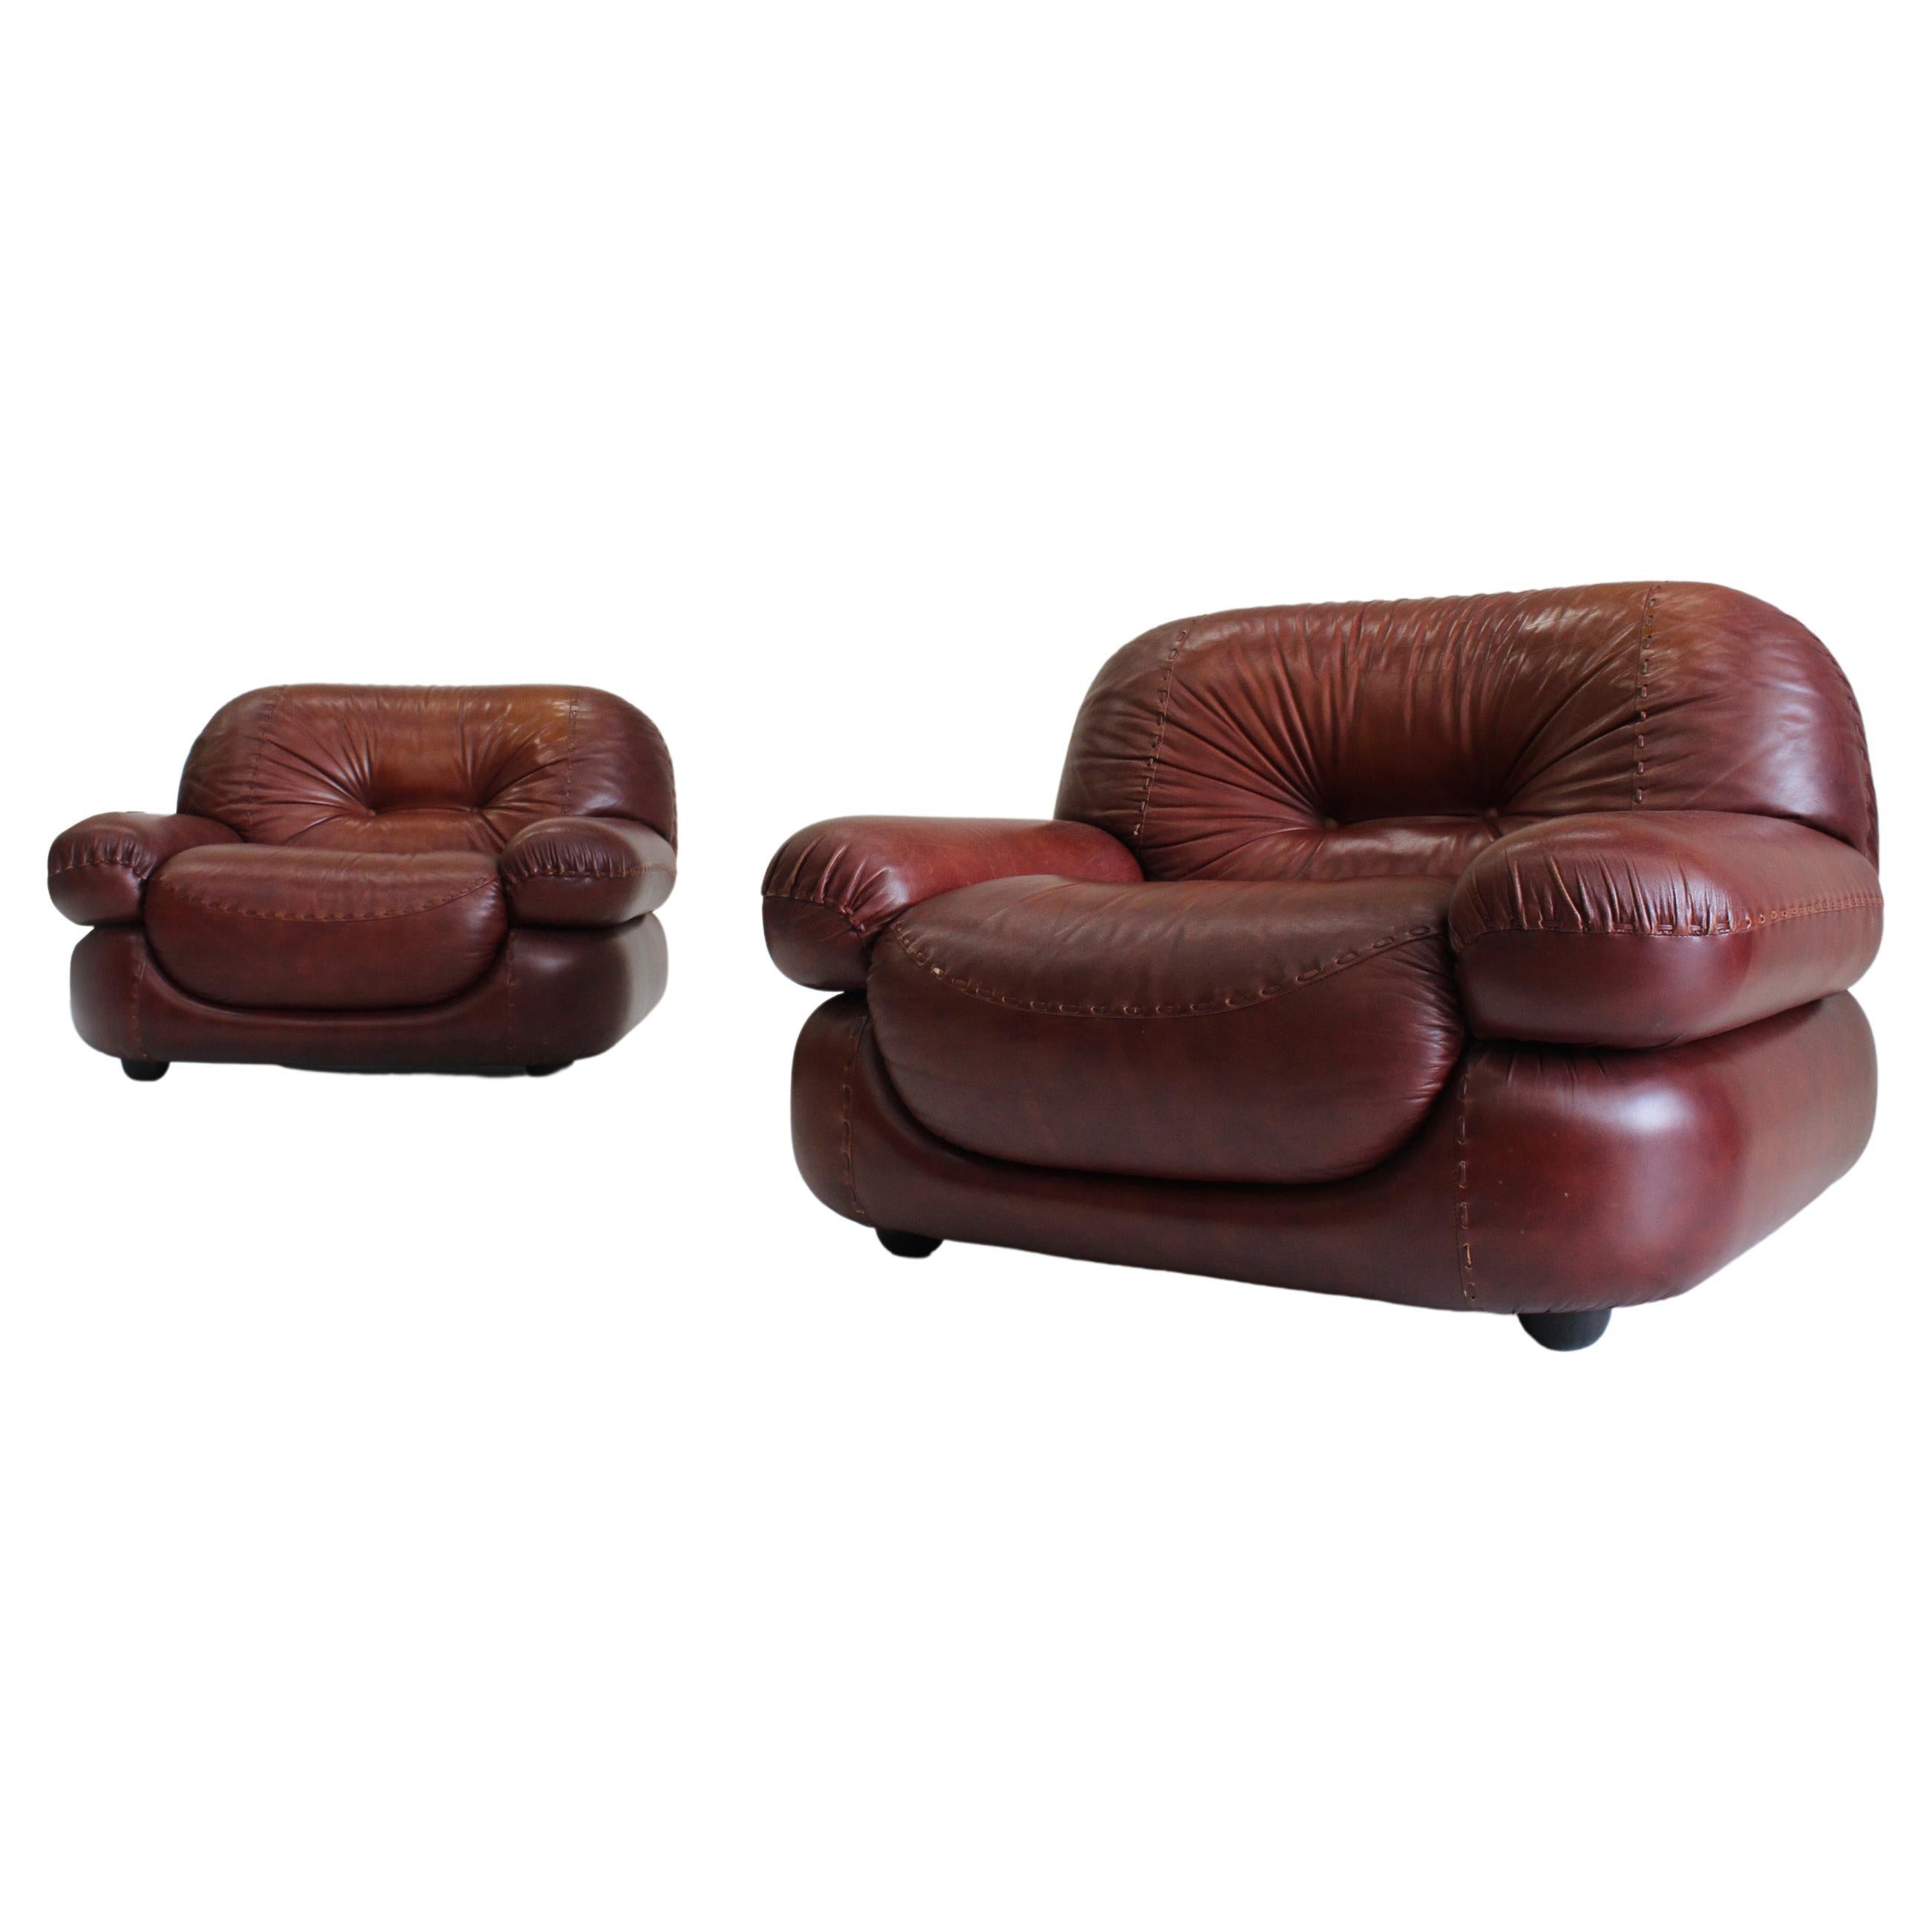 Sapporo Italian Leather Lounge Chairs for Mobil Girgi 1970s, Set of 2